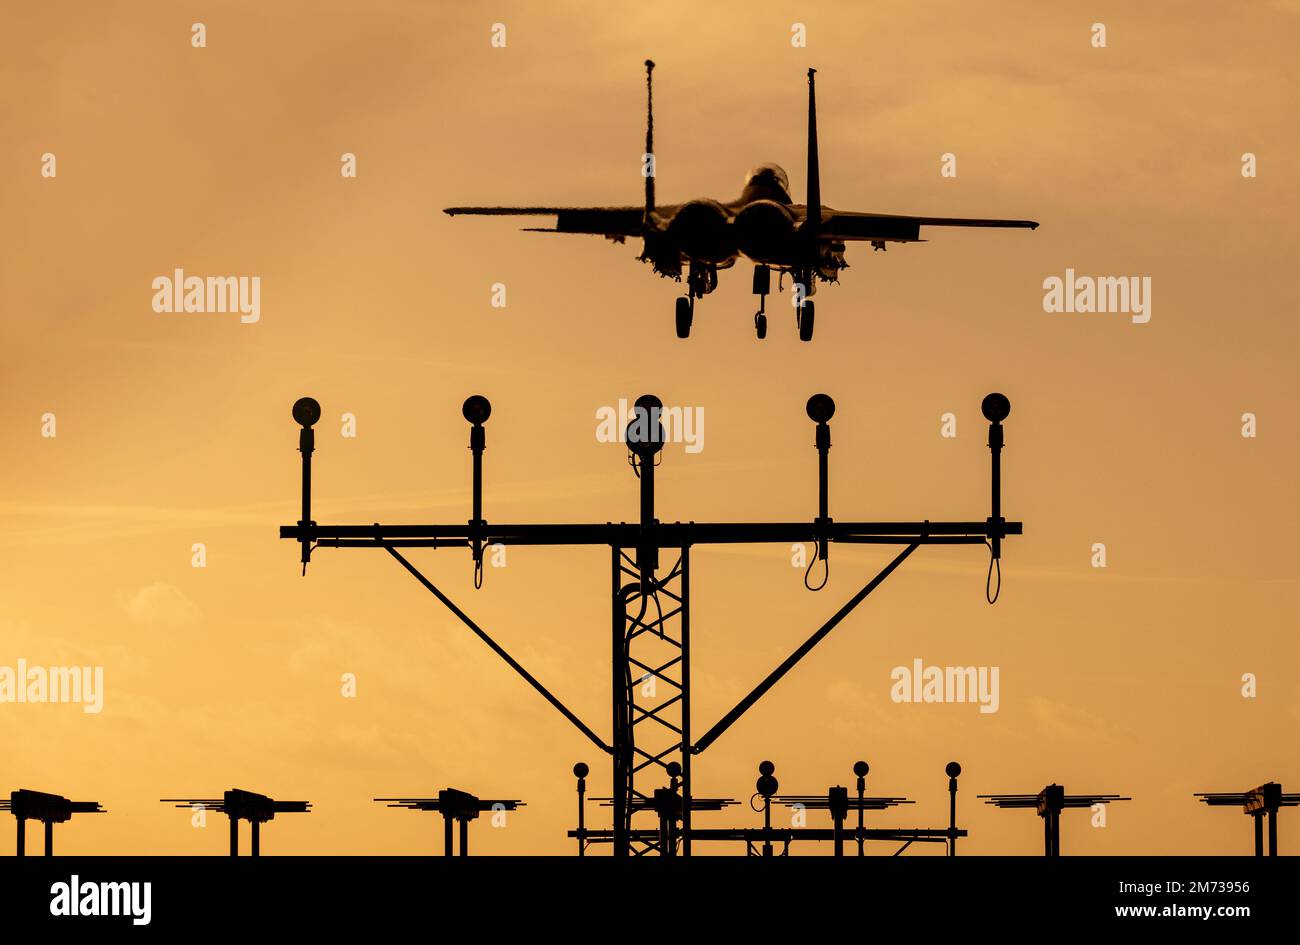 Fighter jet at sunset. Modern military jet aircraft with orange sky returning from a combat mission. Stock Photo